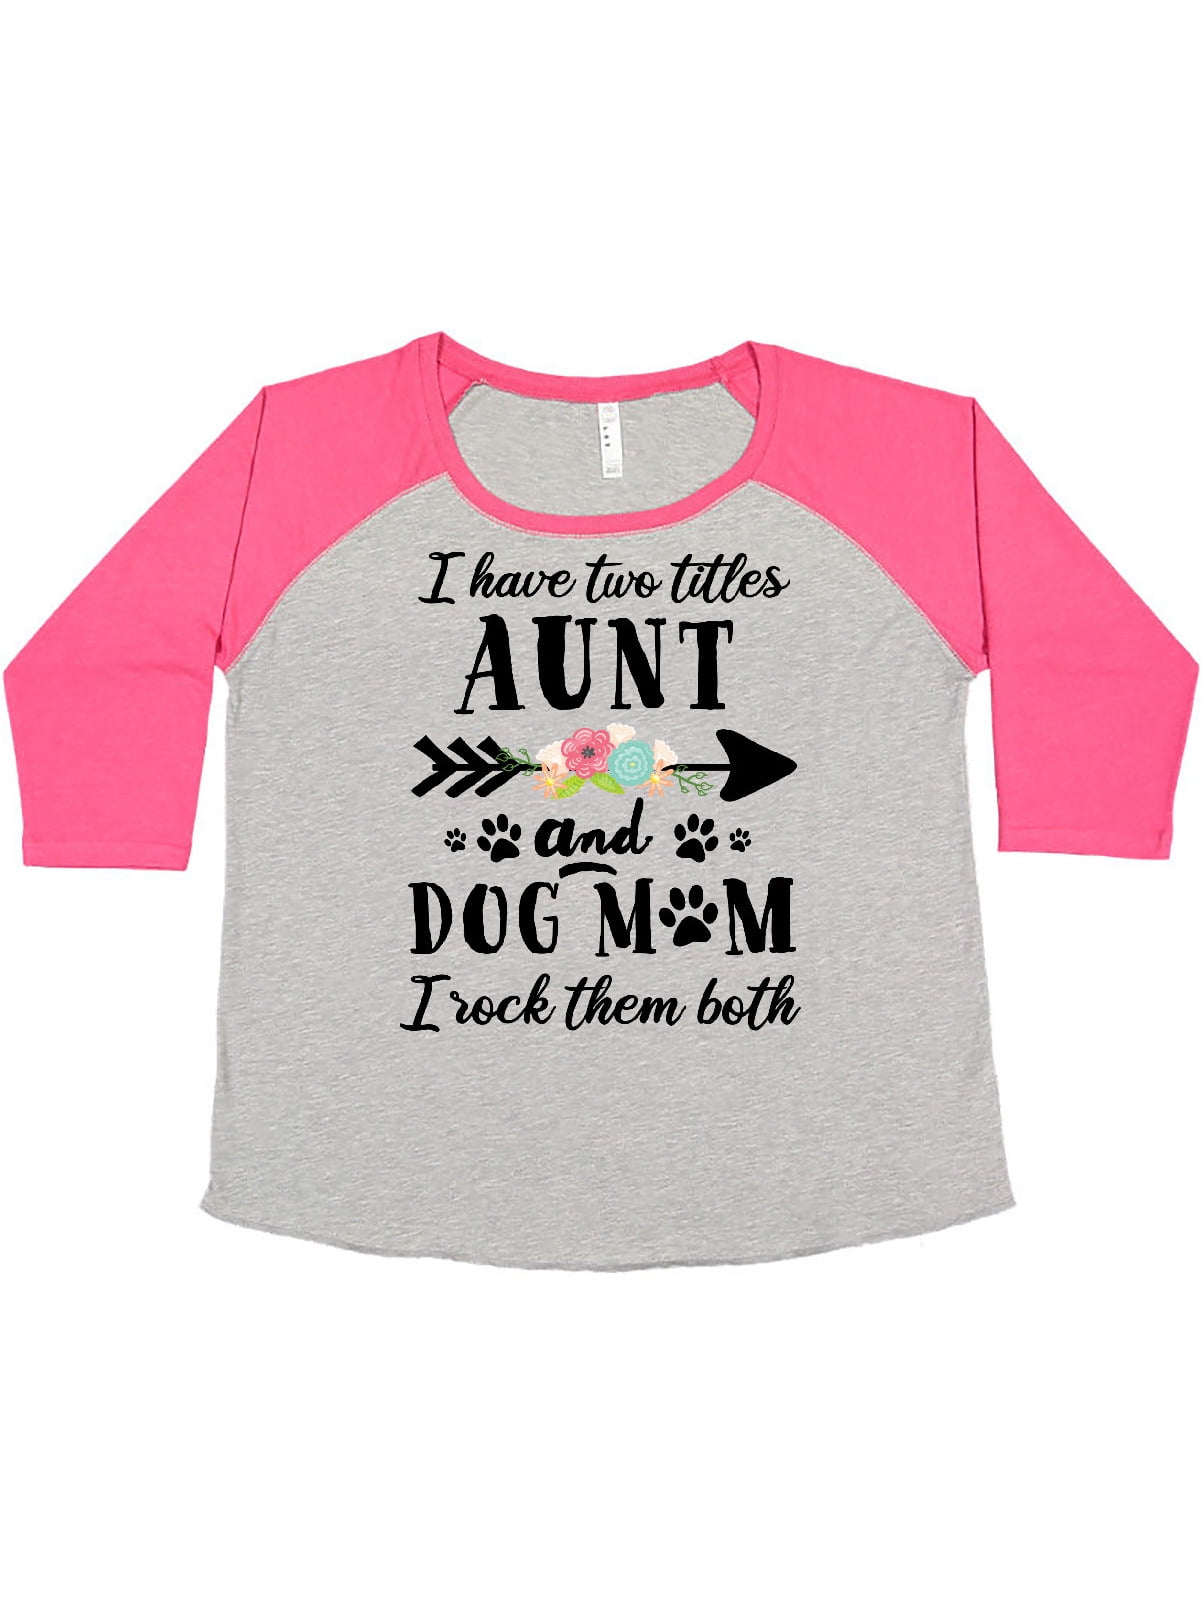 Aunt Gift I Have Two Titles Aunt and Dog Mom and I Rock Them Both Shirt Dog Mom Gift